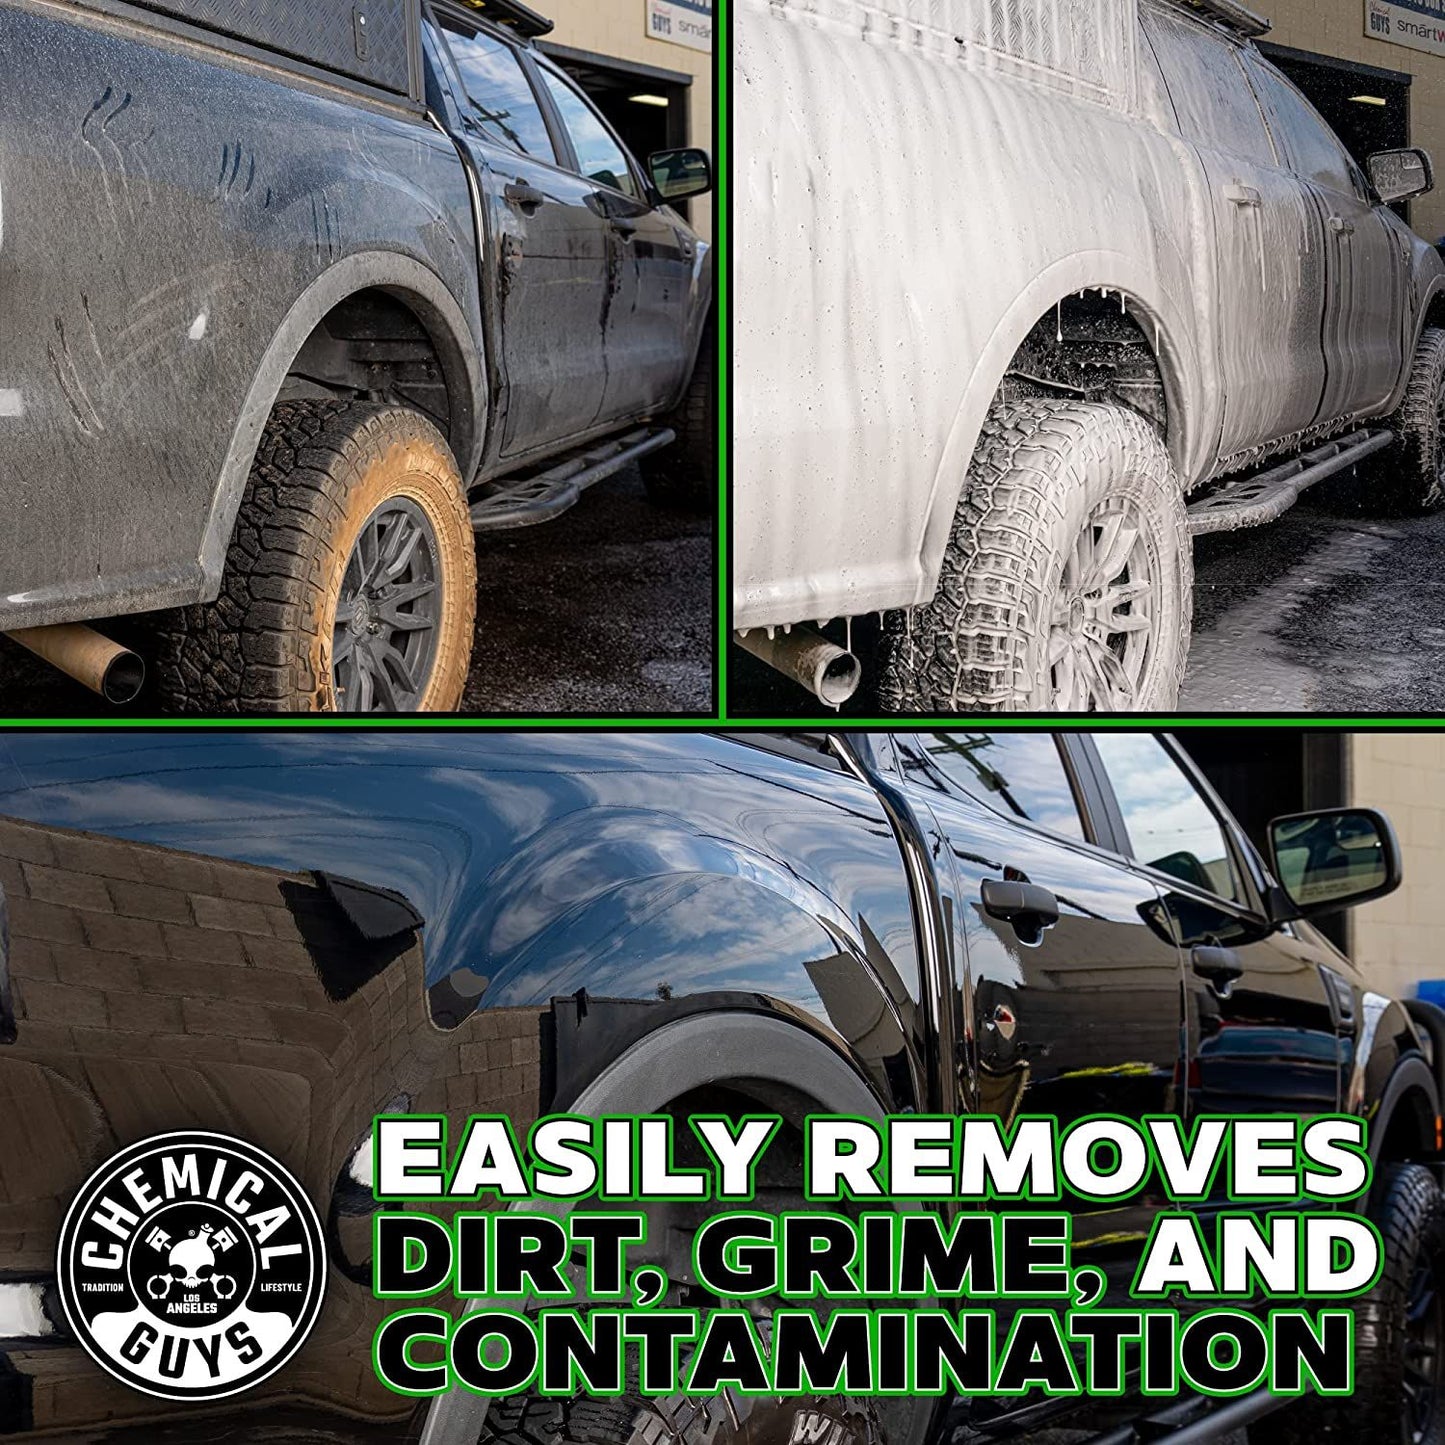 Chemical Guys Honeydew Snow Foam: The latest in snow foam pre-wash technology - the stages of cleaning